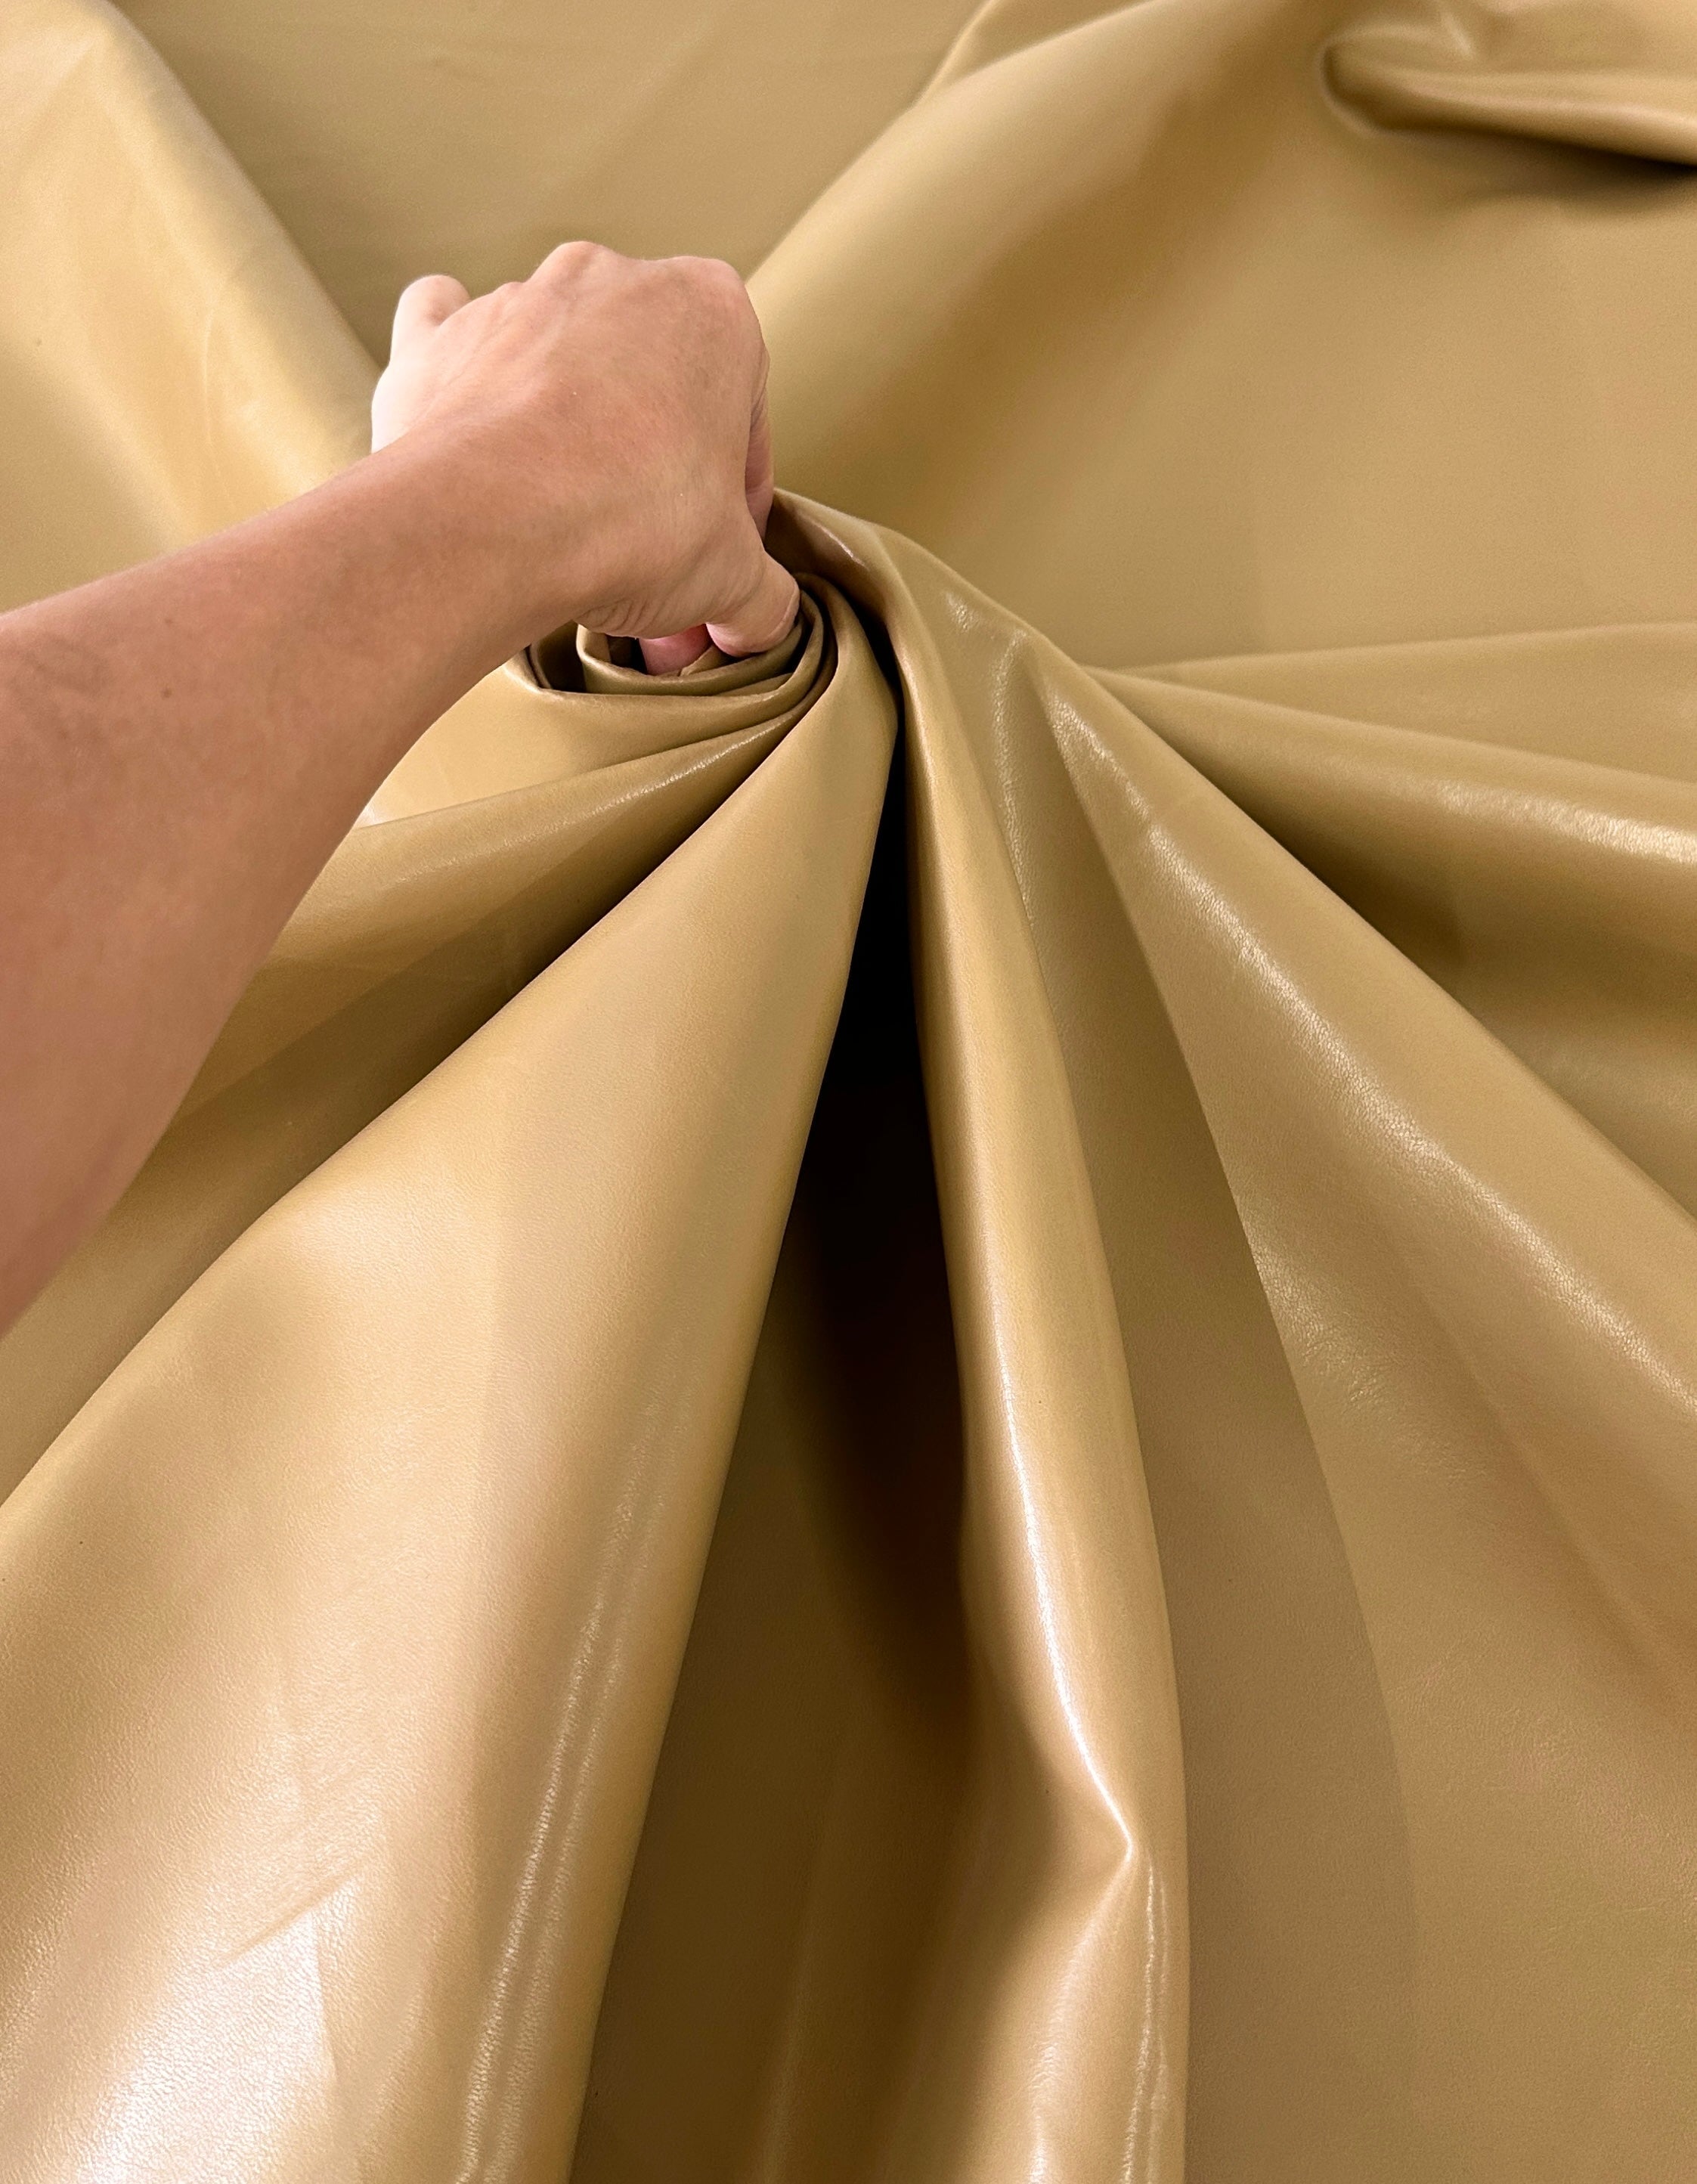 caramel Stretch Faux Leather, light brown stretch faux leather, cream color stretch faux leather, faux leather for woman, faux leather for costumes, faux leather for home decor, 2 way stretch faux leather, leather for blazers, cheap leather, discounted leather, leather on sale